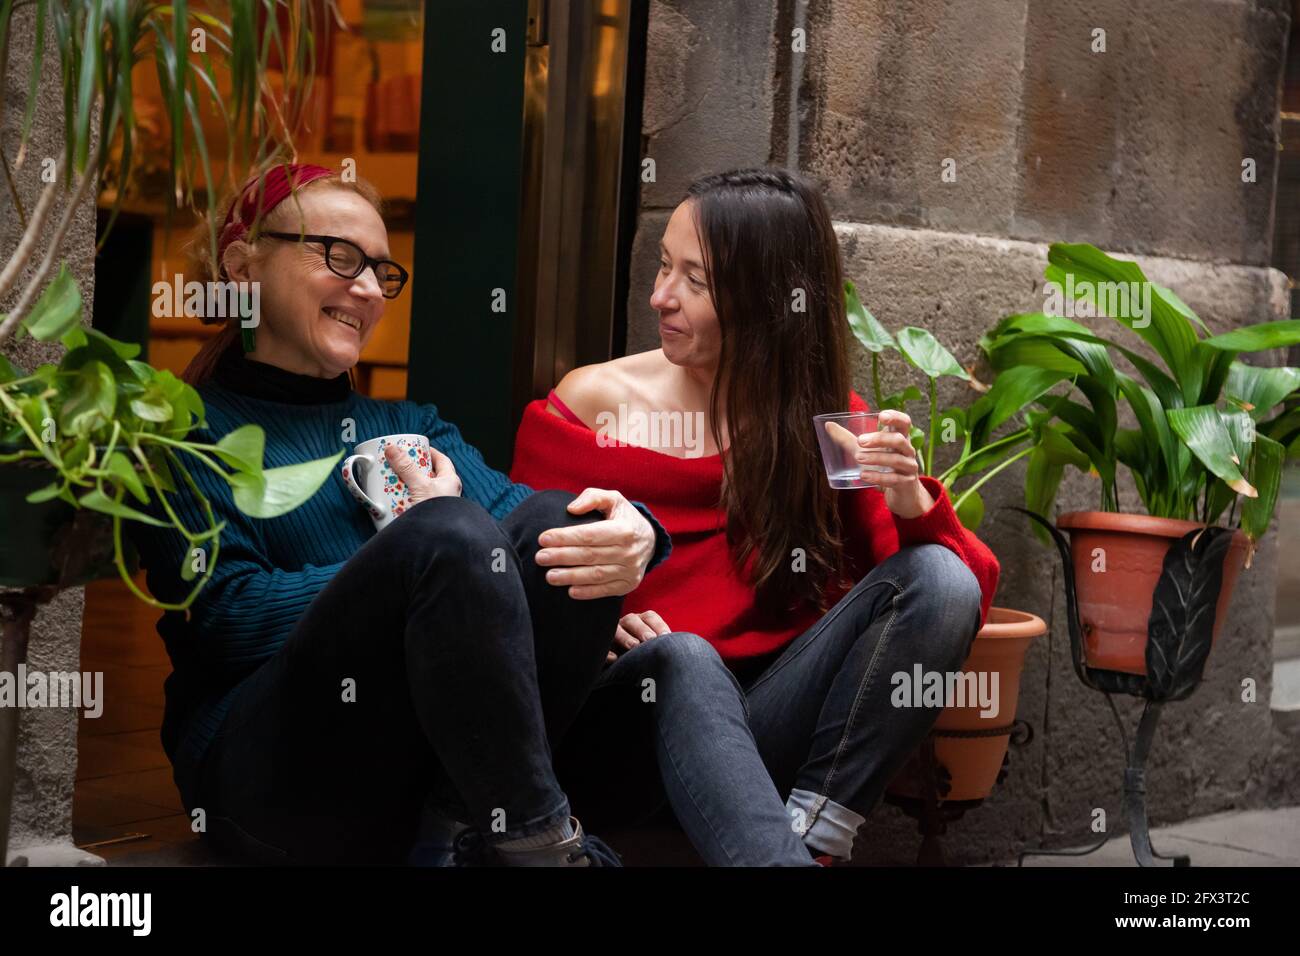 Two middle-aged female entrepreneurs sitting close together in the entrance of their shop. Concept: female entrepreneur, female friendship Stock Photo